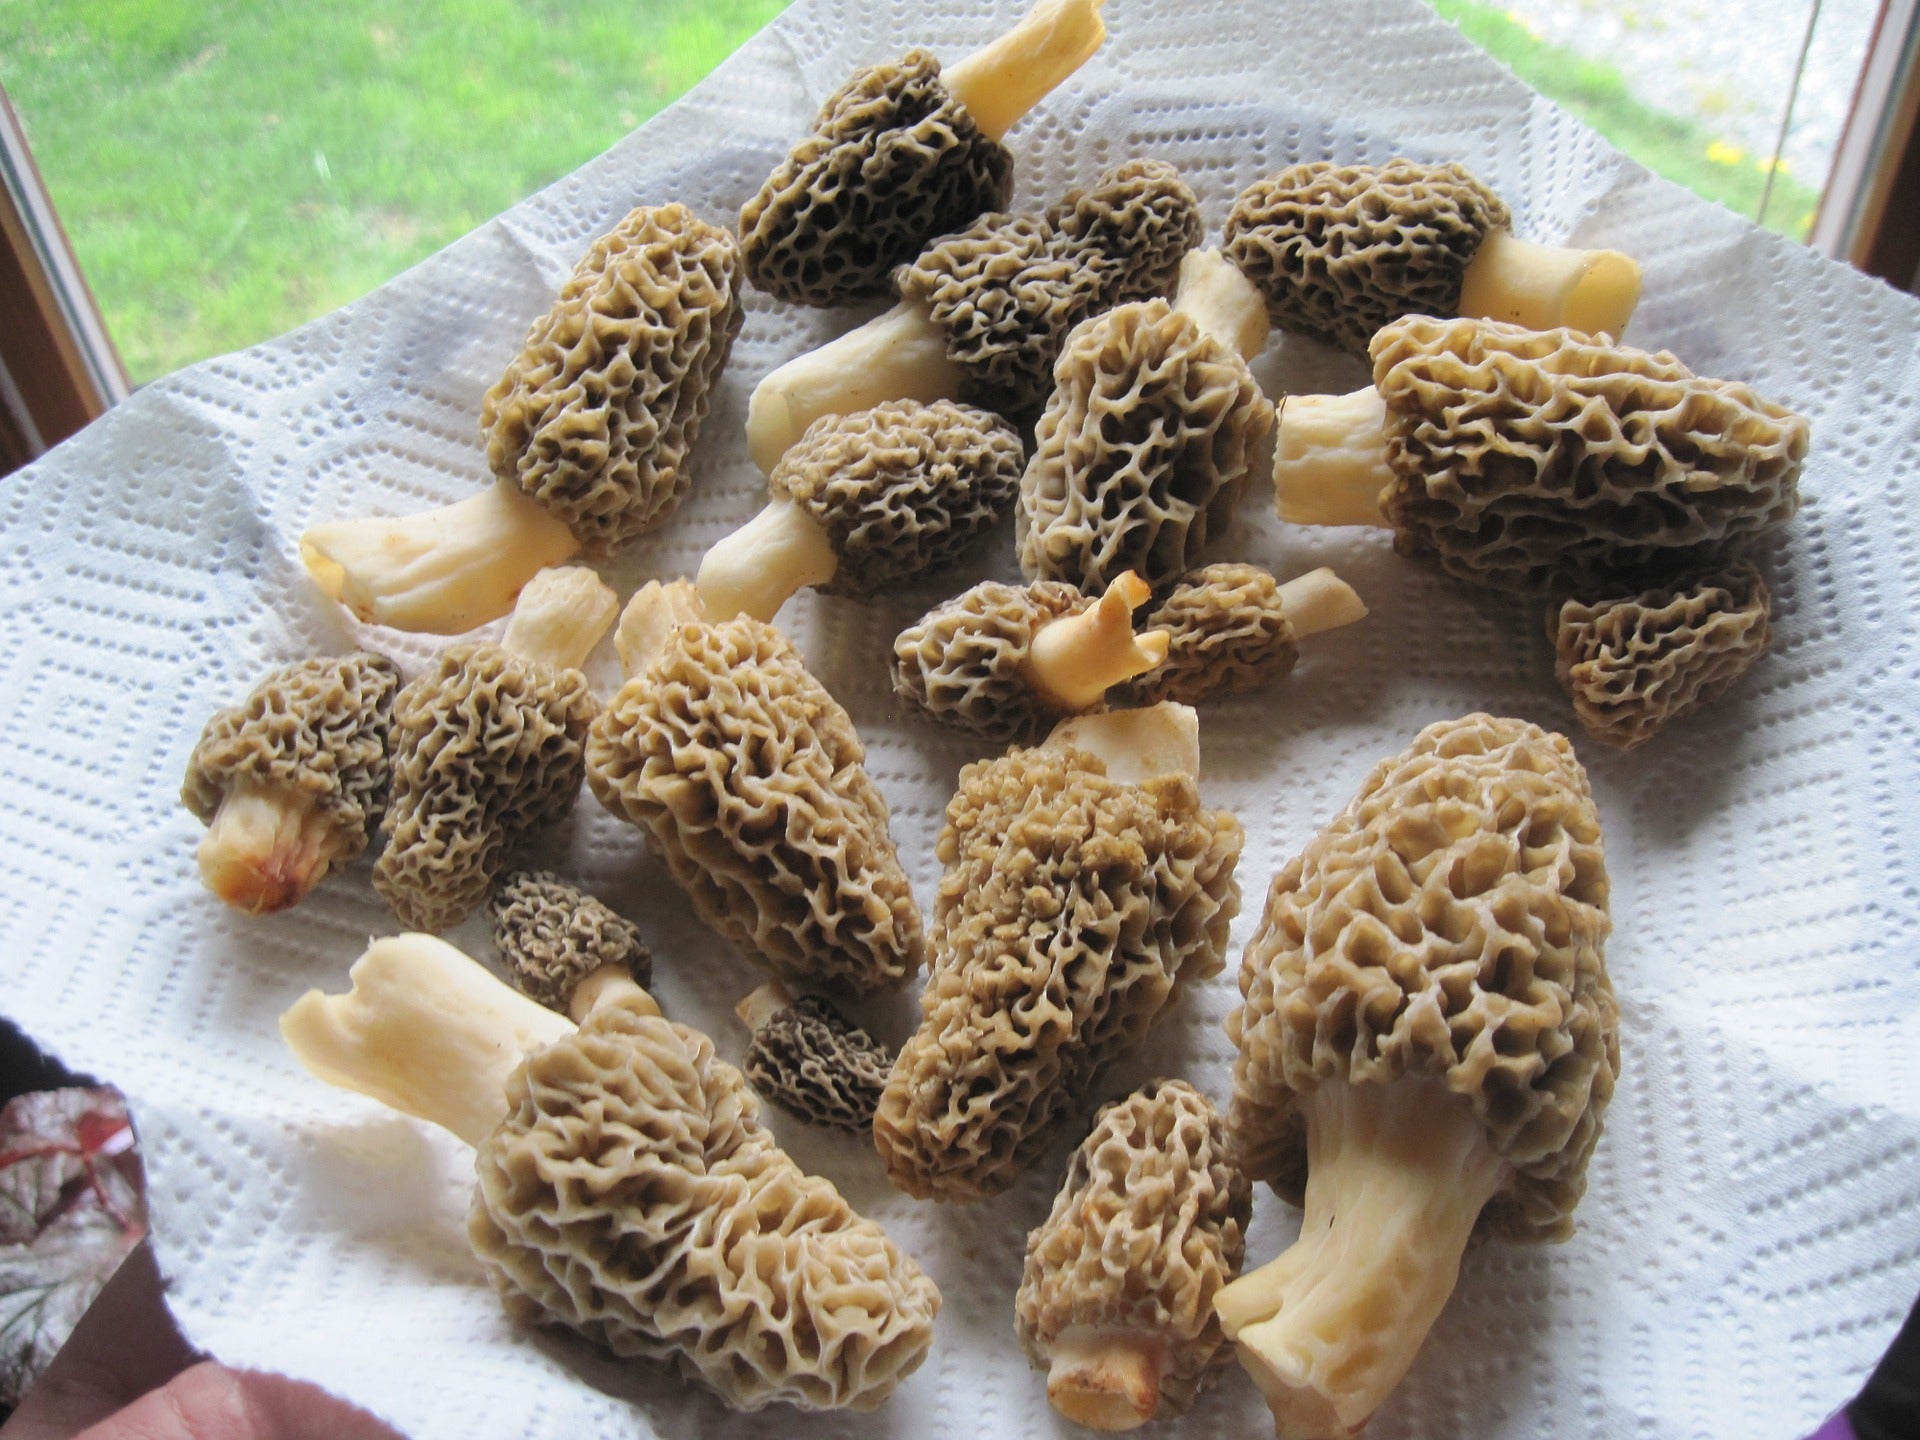 How to Find Urban Morels